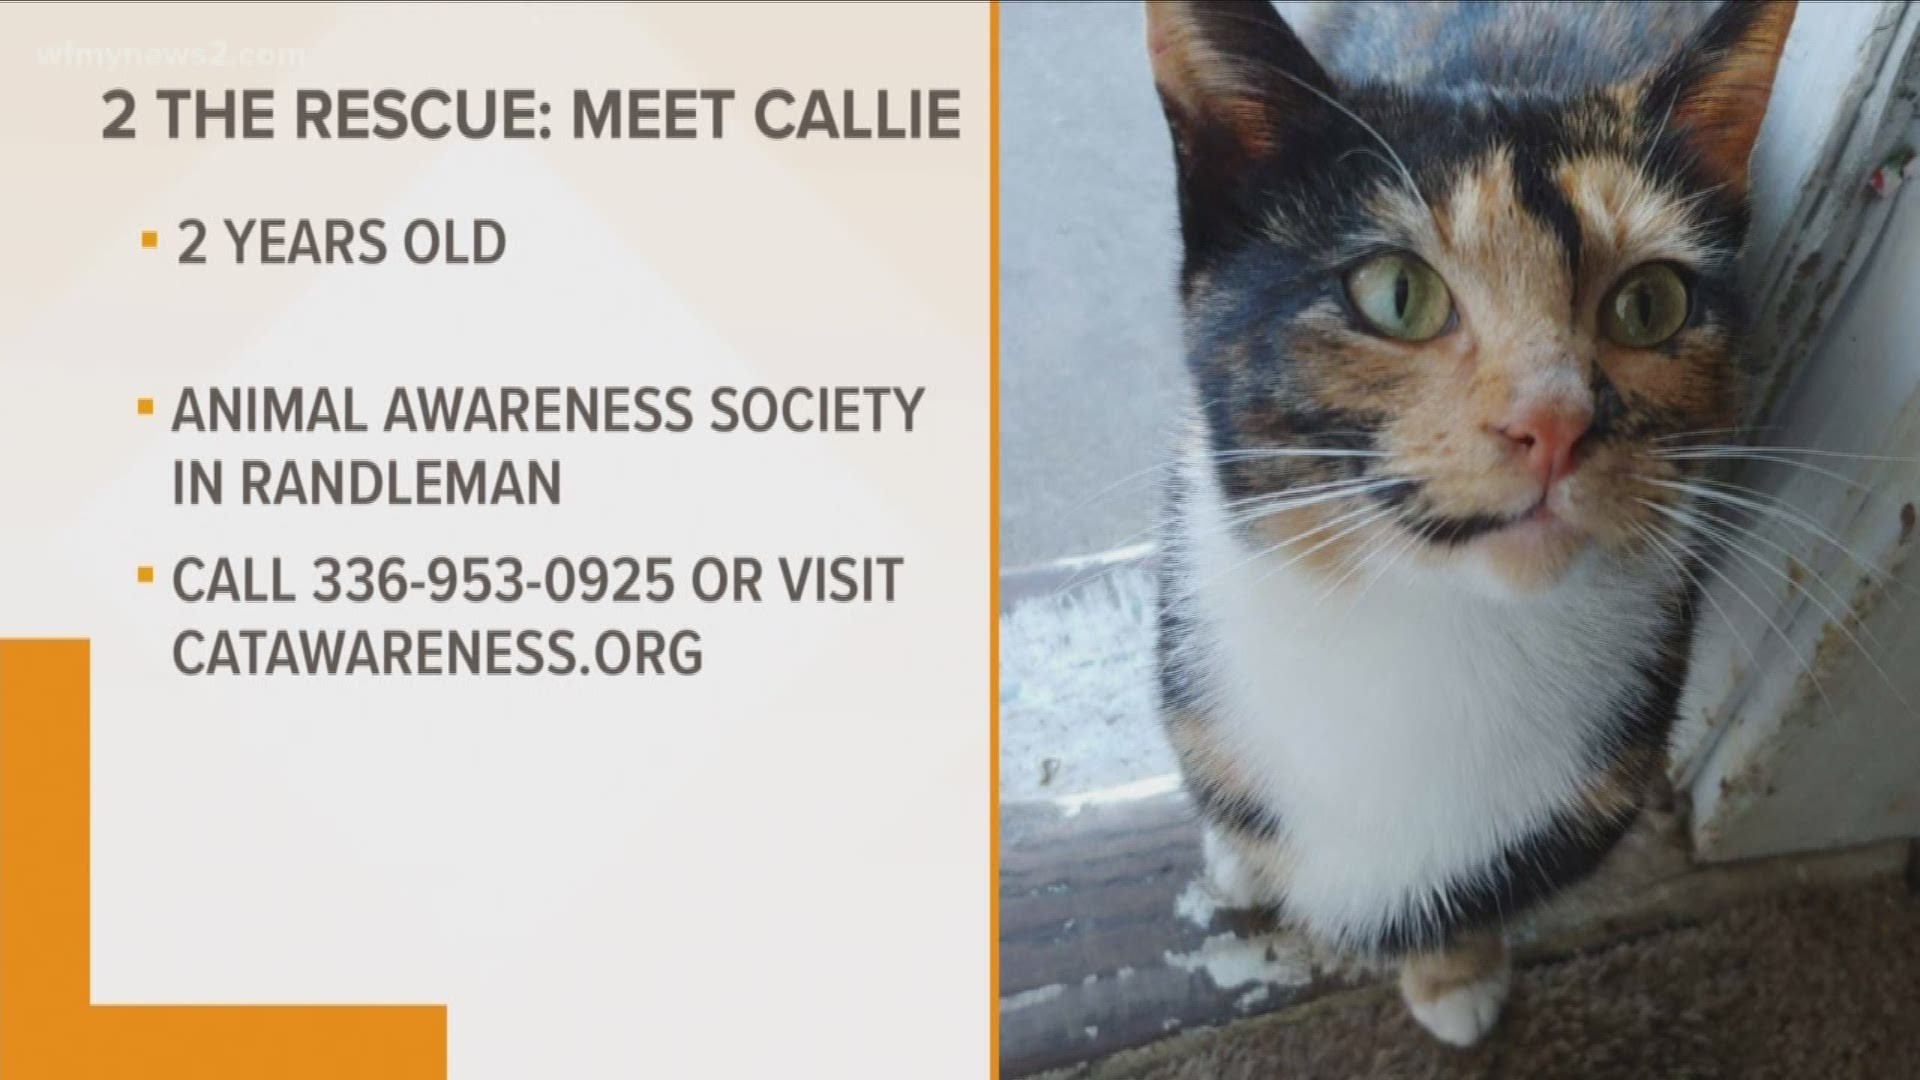 Callie is looking for her purrfect home.